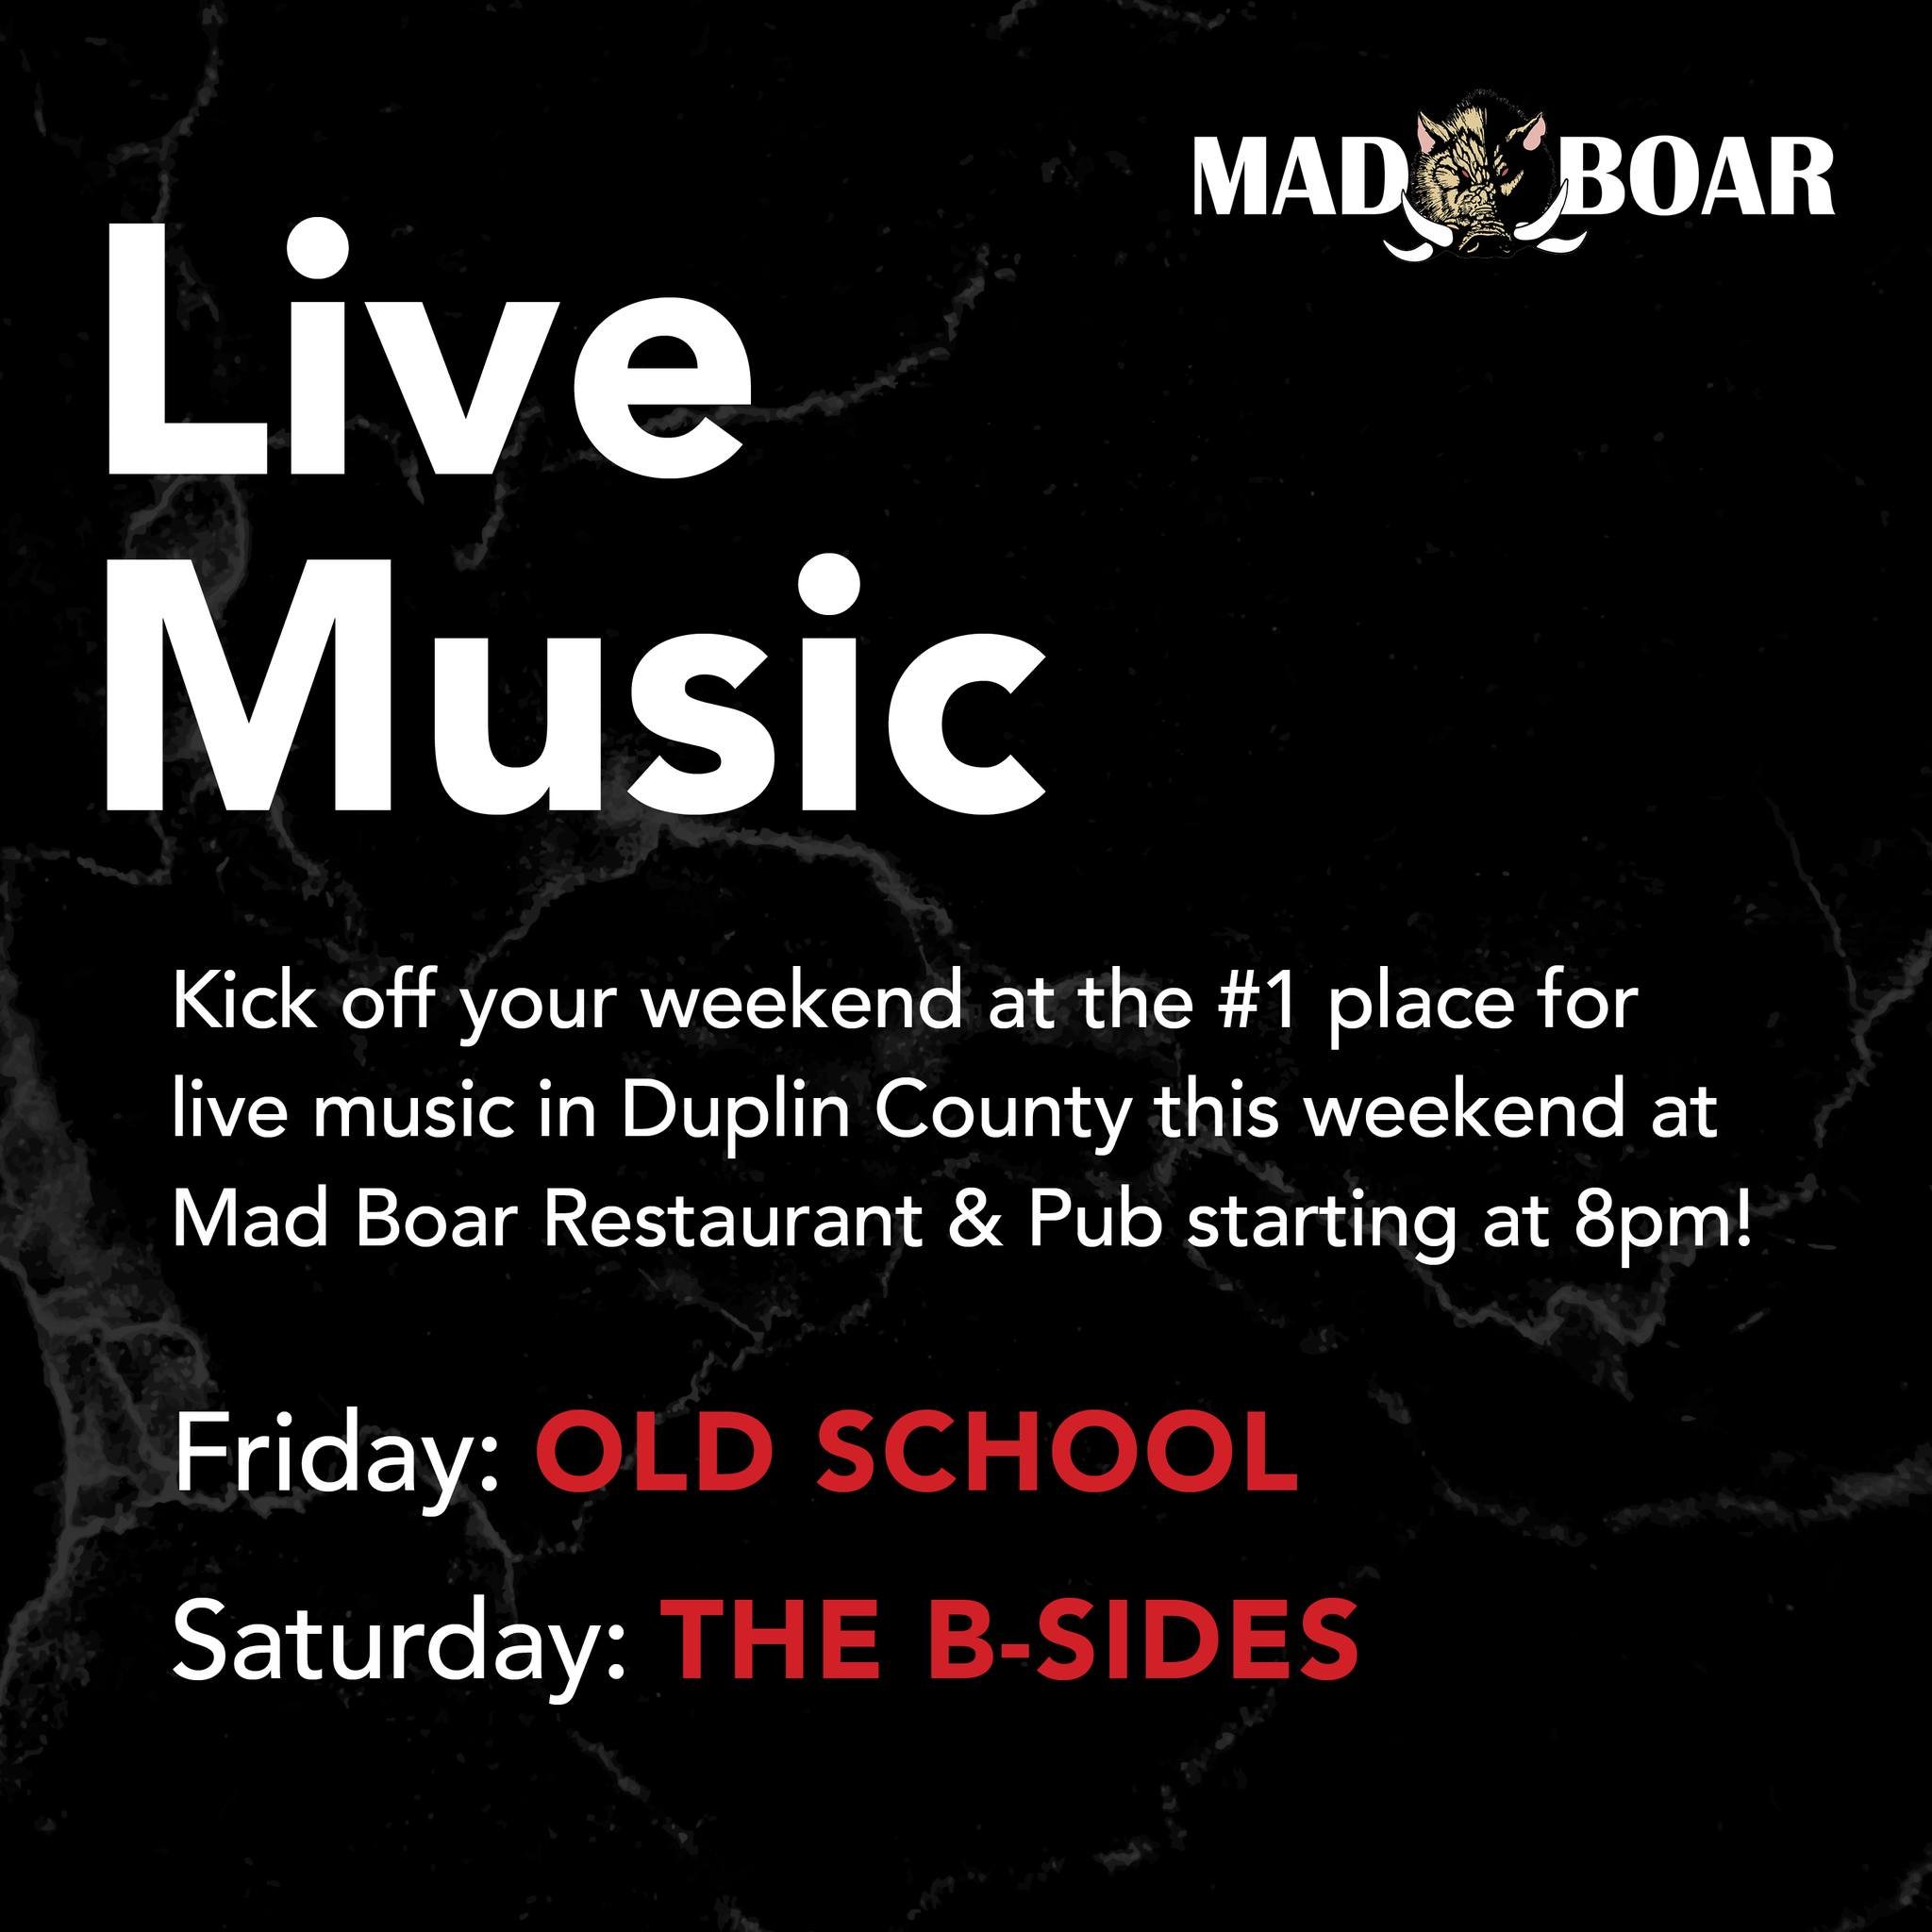 Weekend lineup: Old School rocks the stage Friday at 8pm followed by The B-Sides Saturday at 6pm for the Garden Gala after party. Let's party! 🎤

#madboarnc #wallacenc #exit385 #afterparty ##livemusic #supportlocalmusic #localband #music #livemusicv